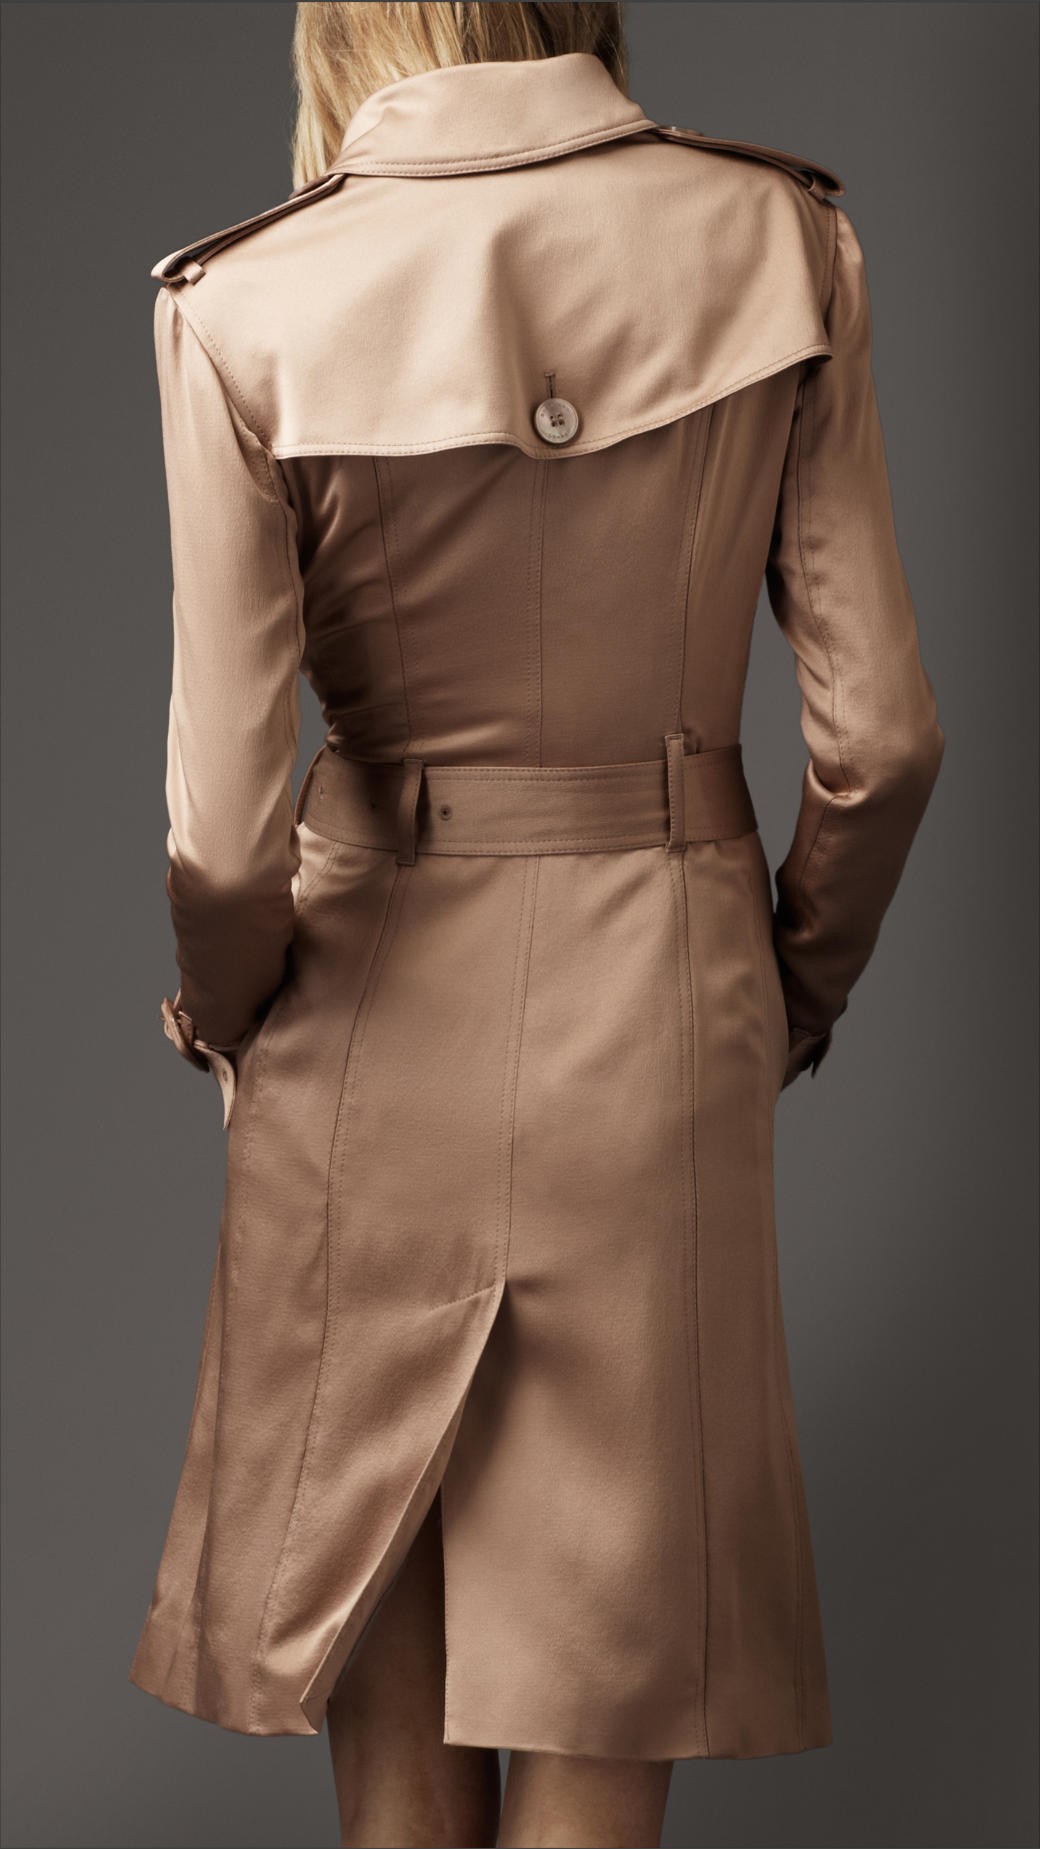 Burberry Silk Satin Trench Coat in Nude (Natural) - Lyst